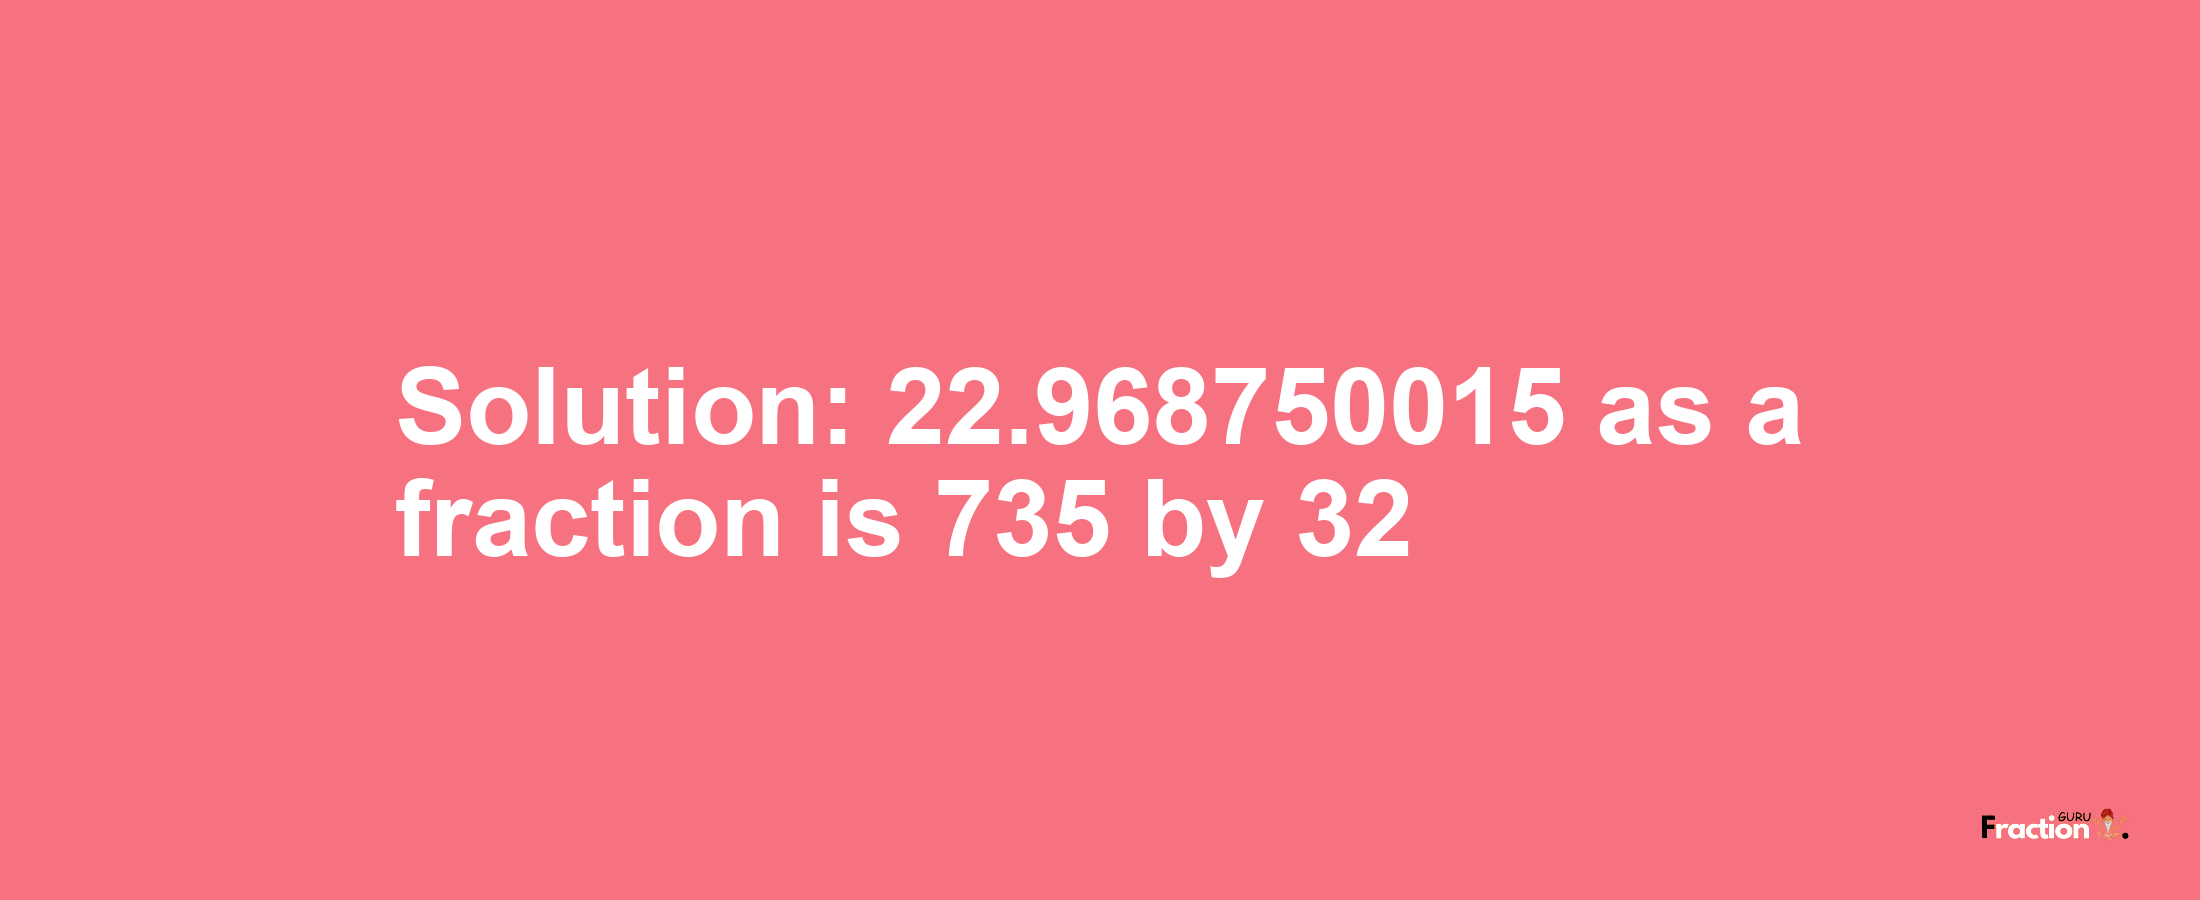 Solution:22.968750015 as a fraction is 735/32